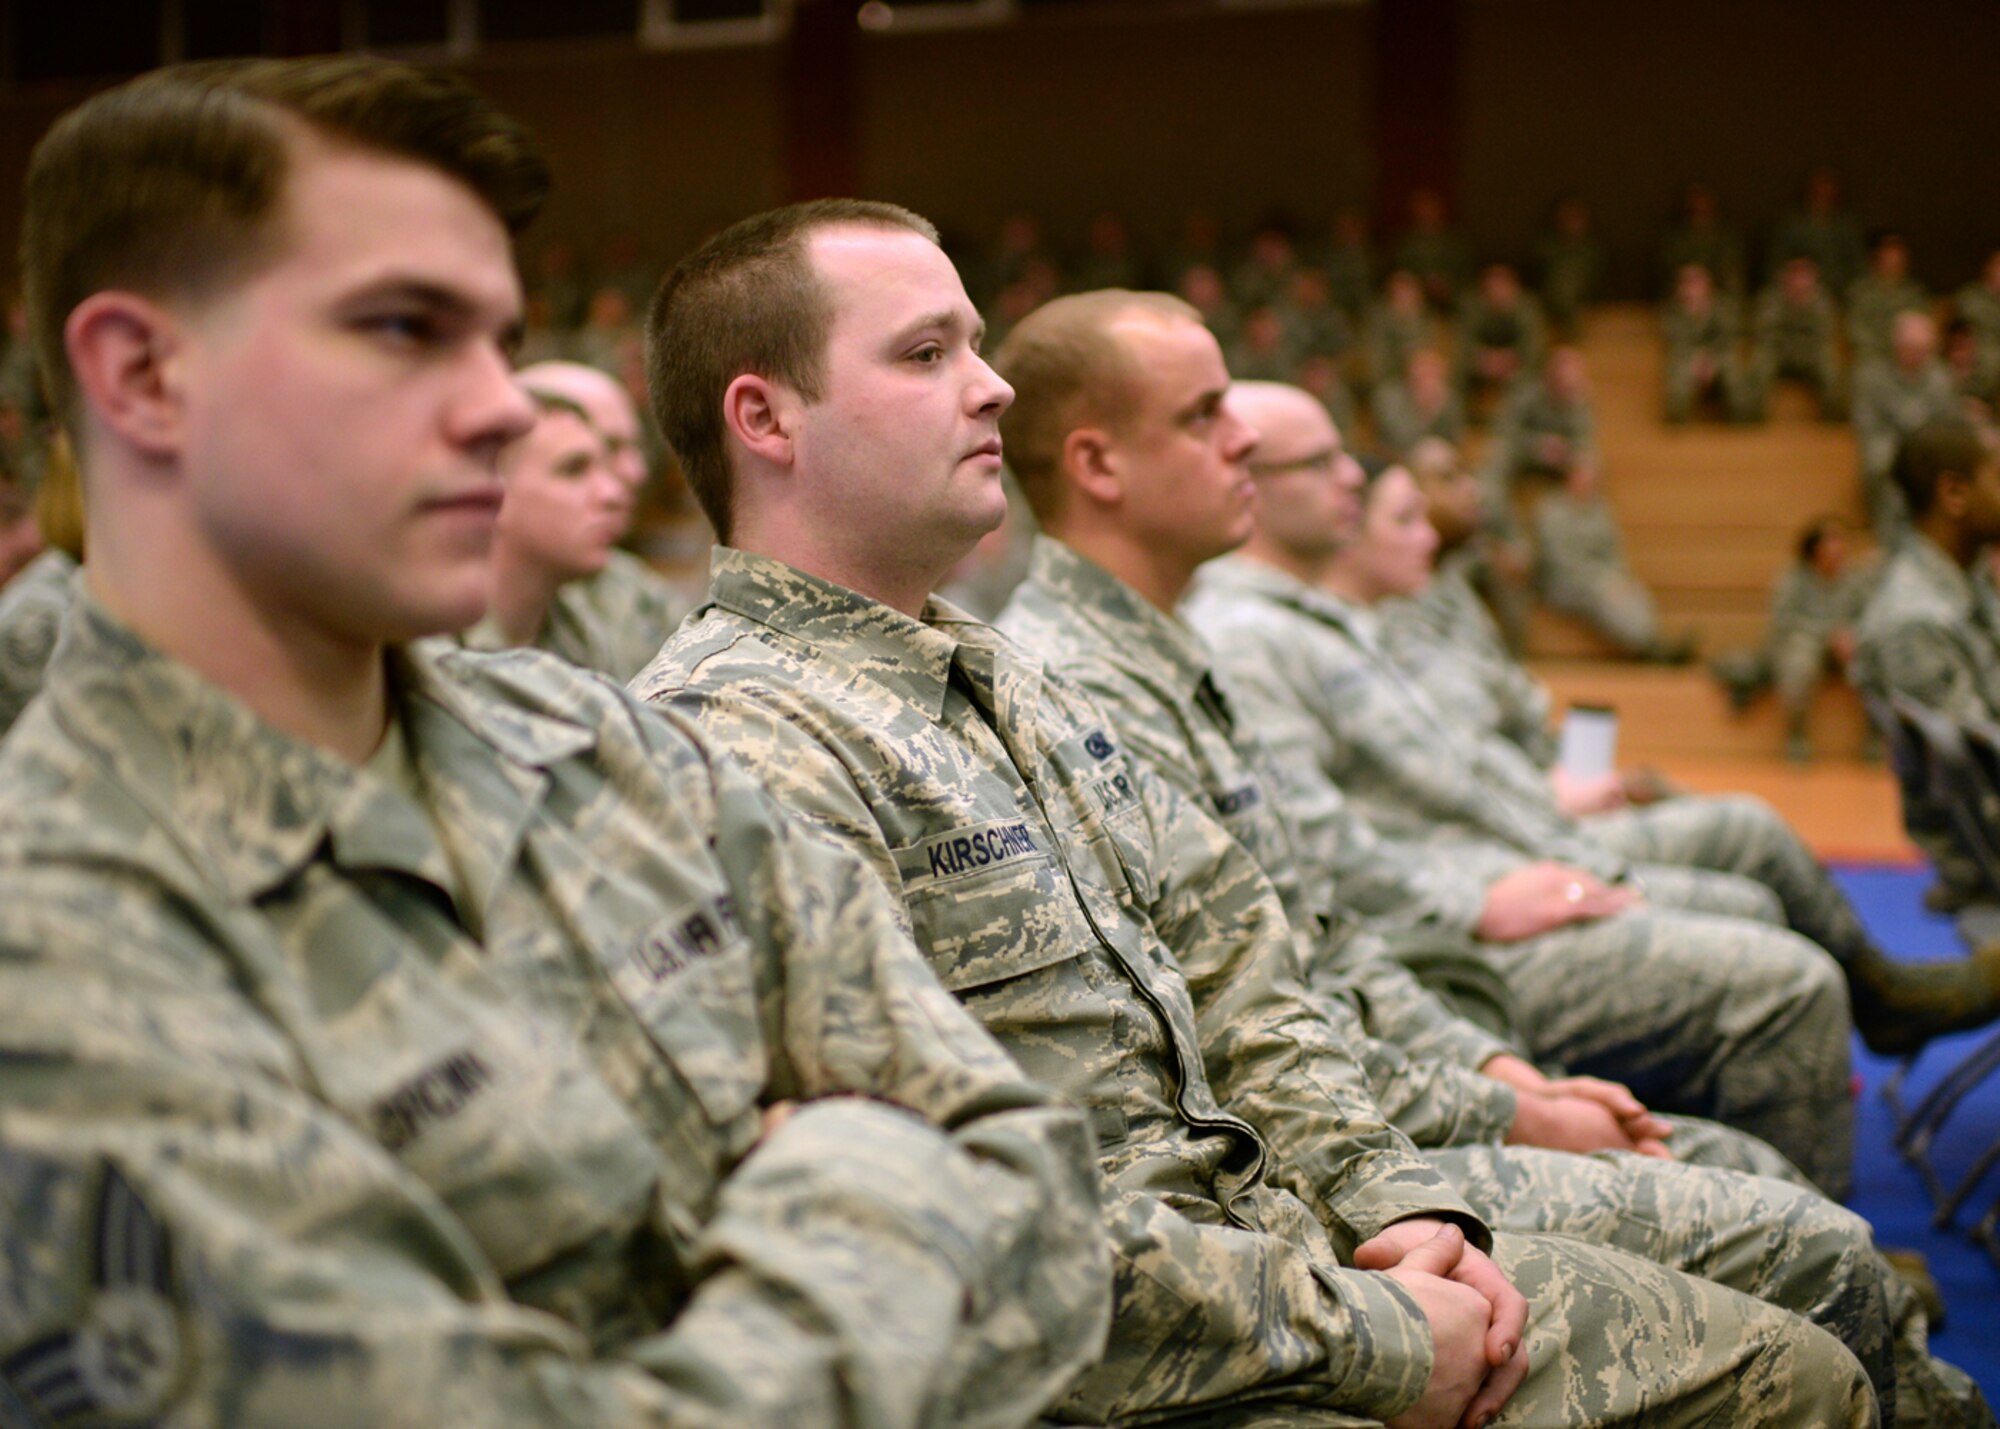 U.S. Air Force Senior Airman Cody Kirschner, 52nd Logistics Readiness Squadron and native of Fort Worth, Texas, listens to 52nd Fighter Wing leadership during a mass briefing in the Skelton Memorial Fitness Center at Spangdahlem Air Base, Germany, March 26, 2014. This commander’s call specifically targeted Spangdahlem Air Base's enlisted corps with topics ranging from force management to budget concerns. (U.S. Air Force photo by Staff Sgt. Daryl Knee/Released)